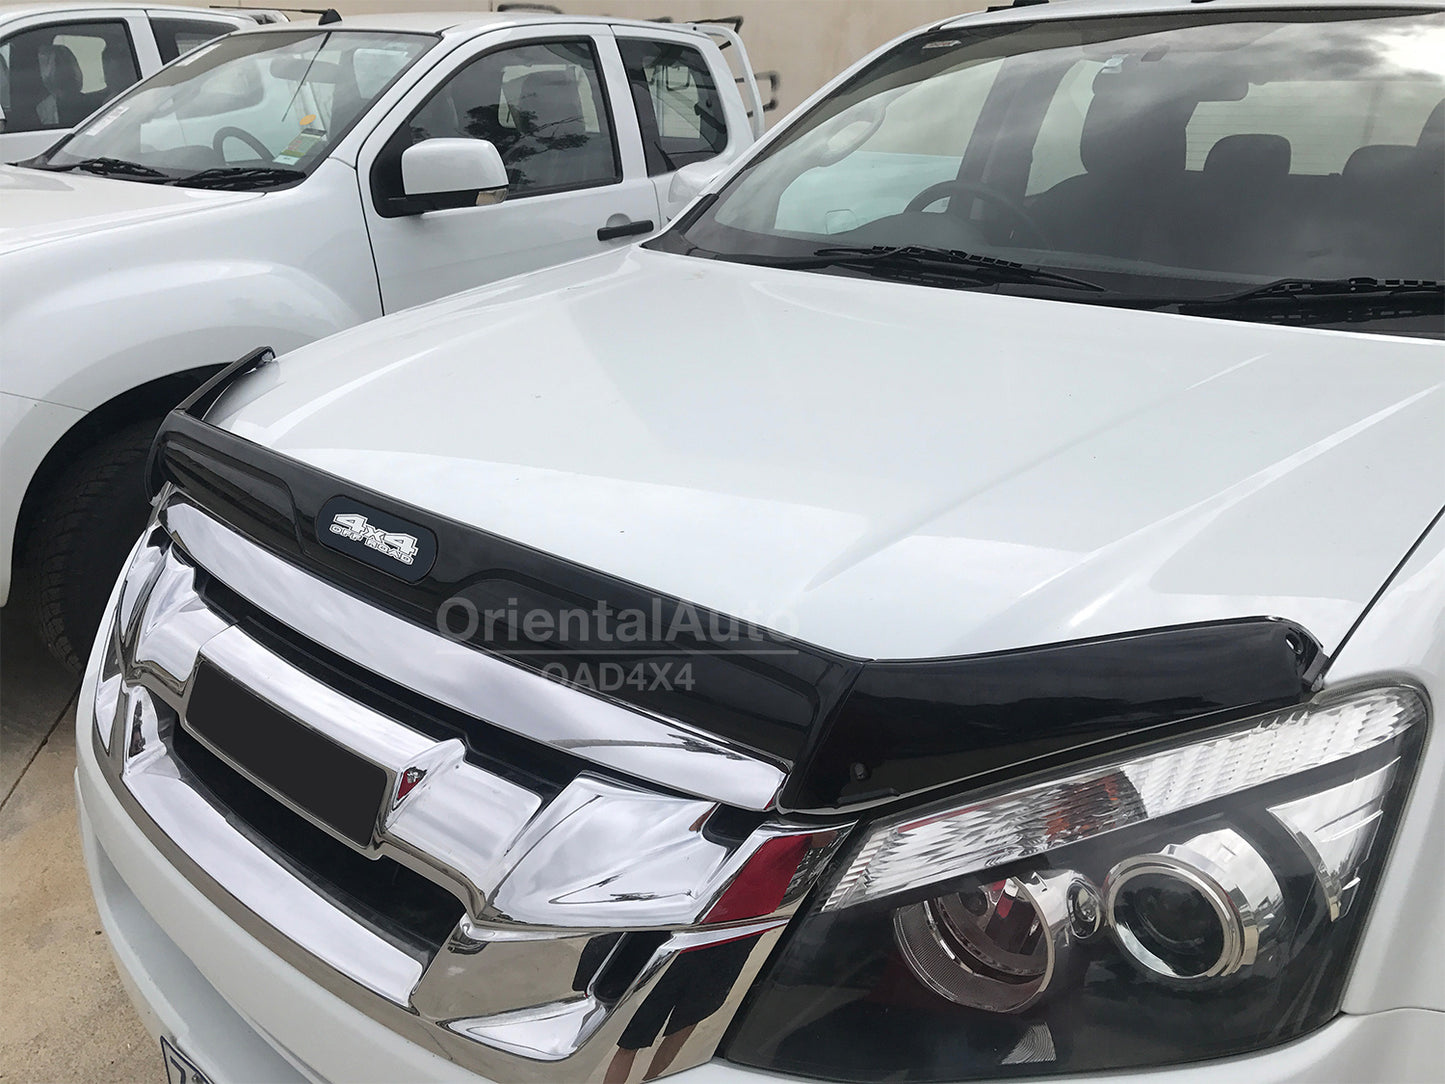 Injection Modeling Bonnet Protector & Injection Weathershield for ISUZU DMAX D-MAX Single / Extra Cab 2012-2016 Weather Shields Window Visor Hood Protector Bonnet Guard